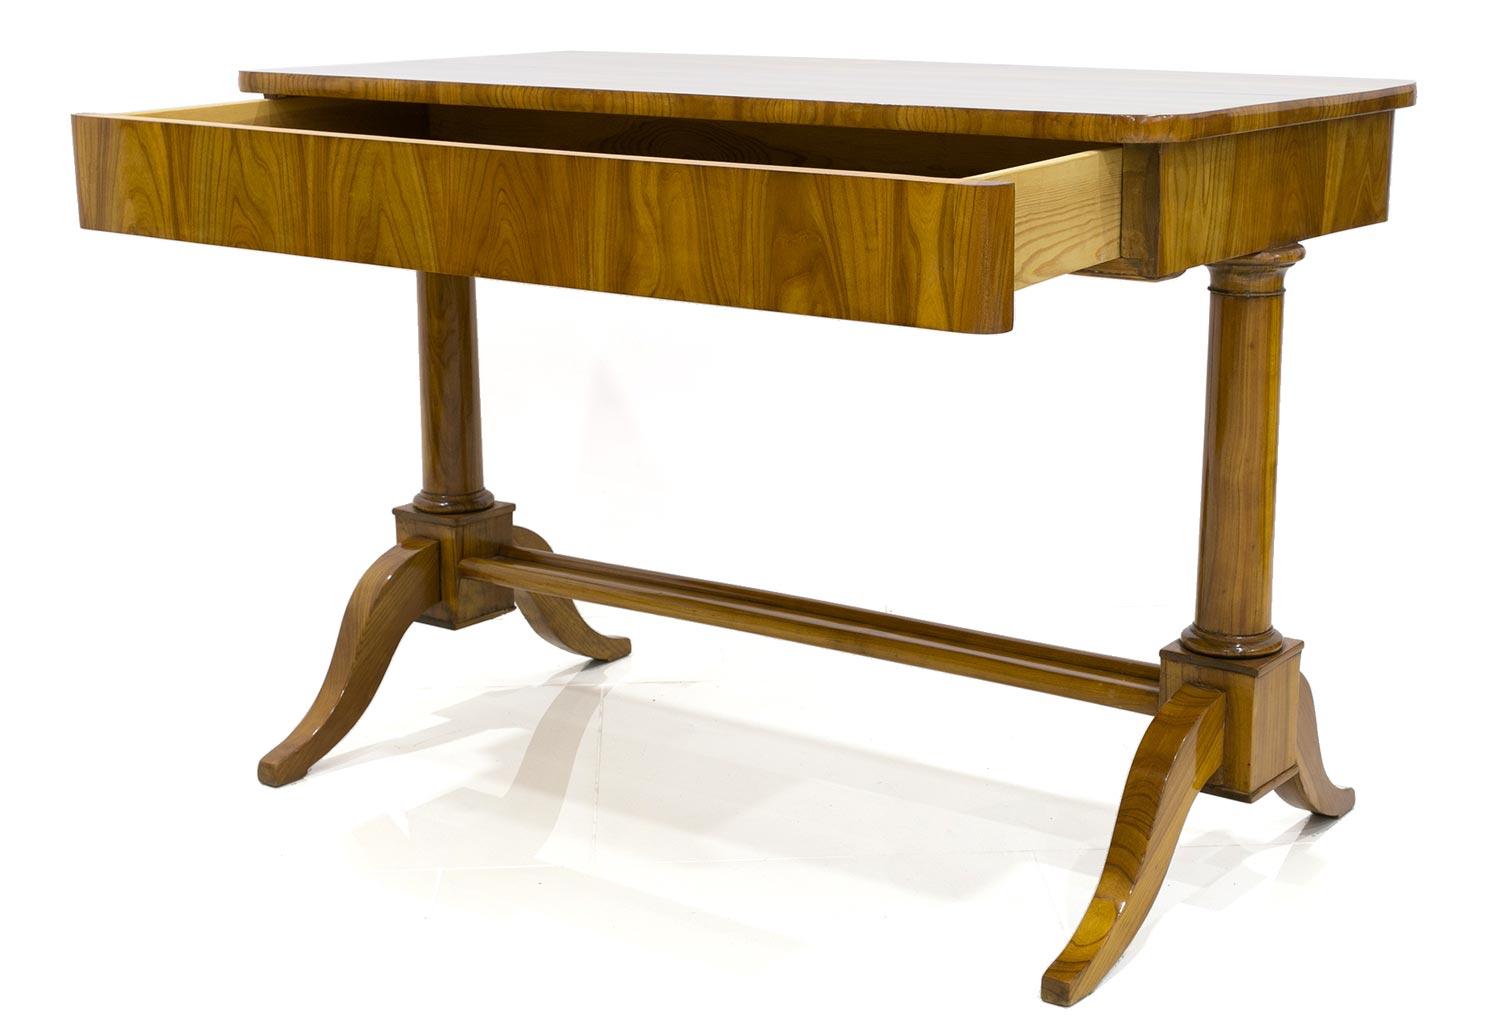 This Biedermeier lady desk comes from Germany from circa 1830. It features one spacious practical drawer and a comfortable footrest. The piece was fully renovated polished to high gloss.